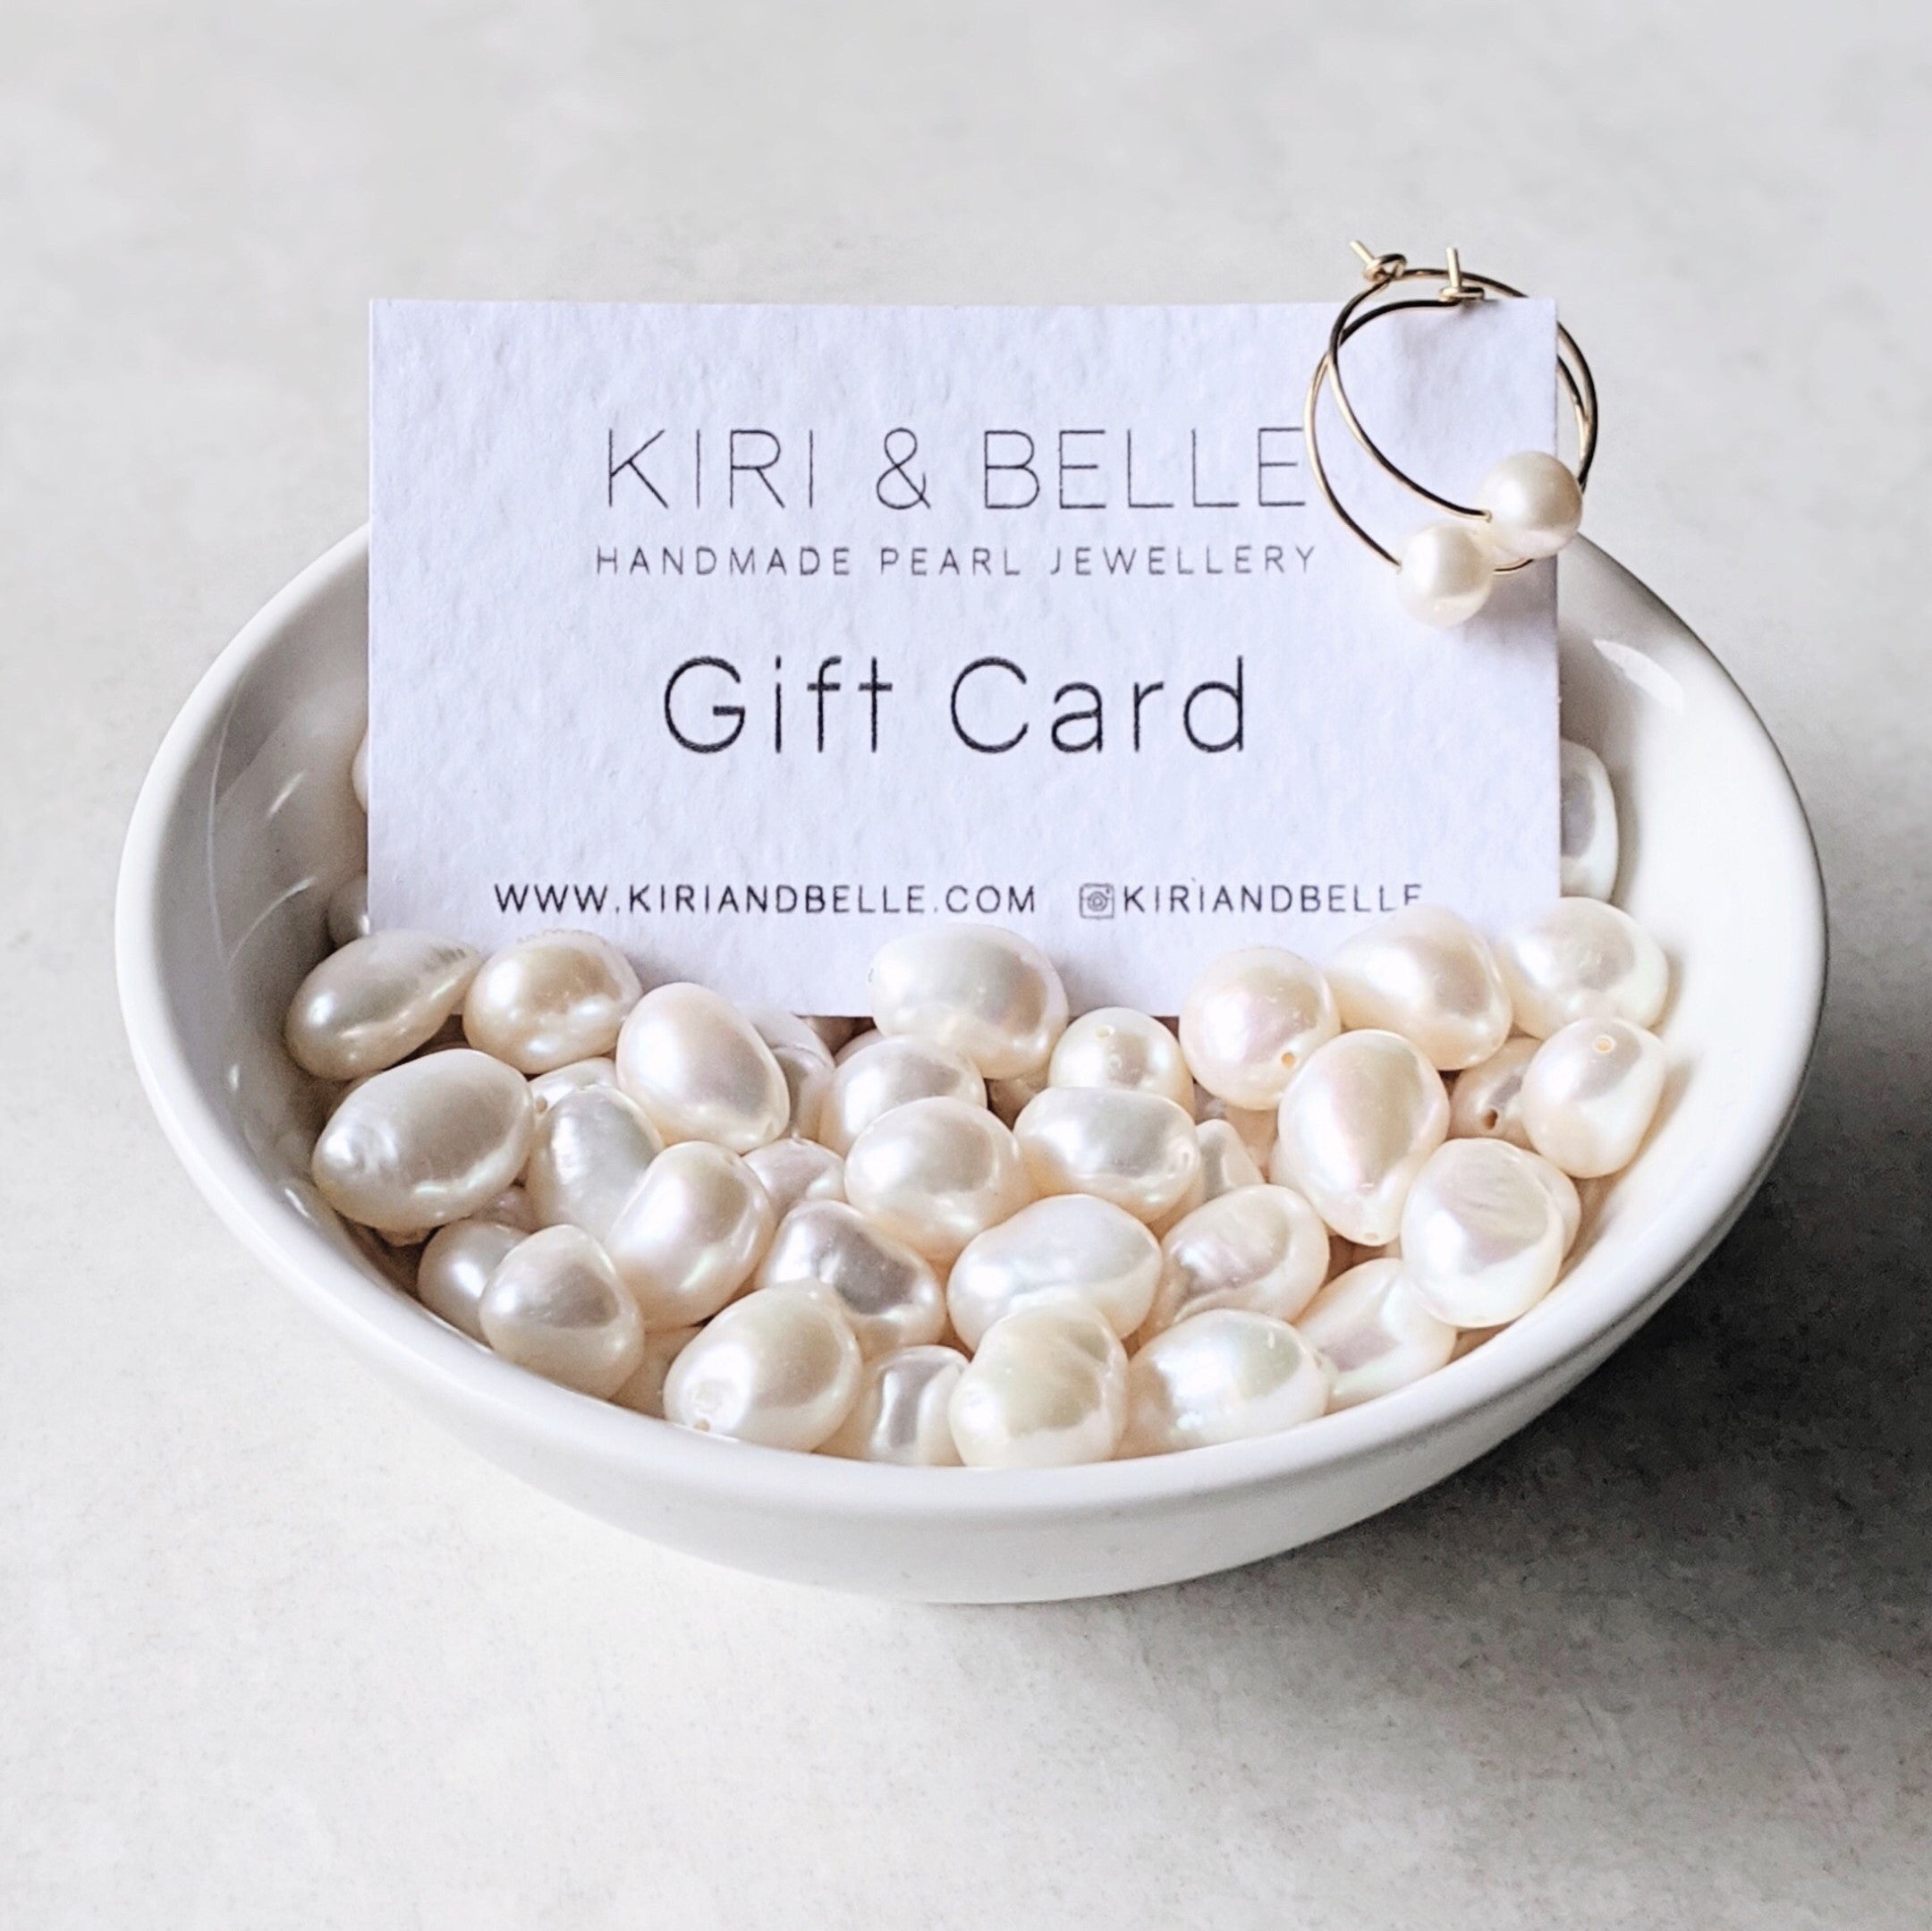 Electronic Gift Card Baroque Pearl Jewellery eGift Gifts Made In The UK Kiri & Belle